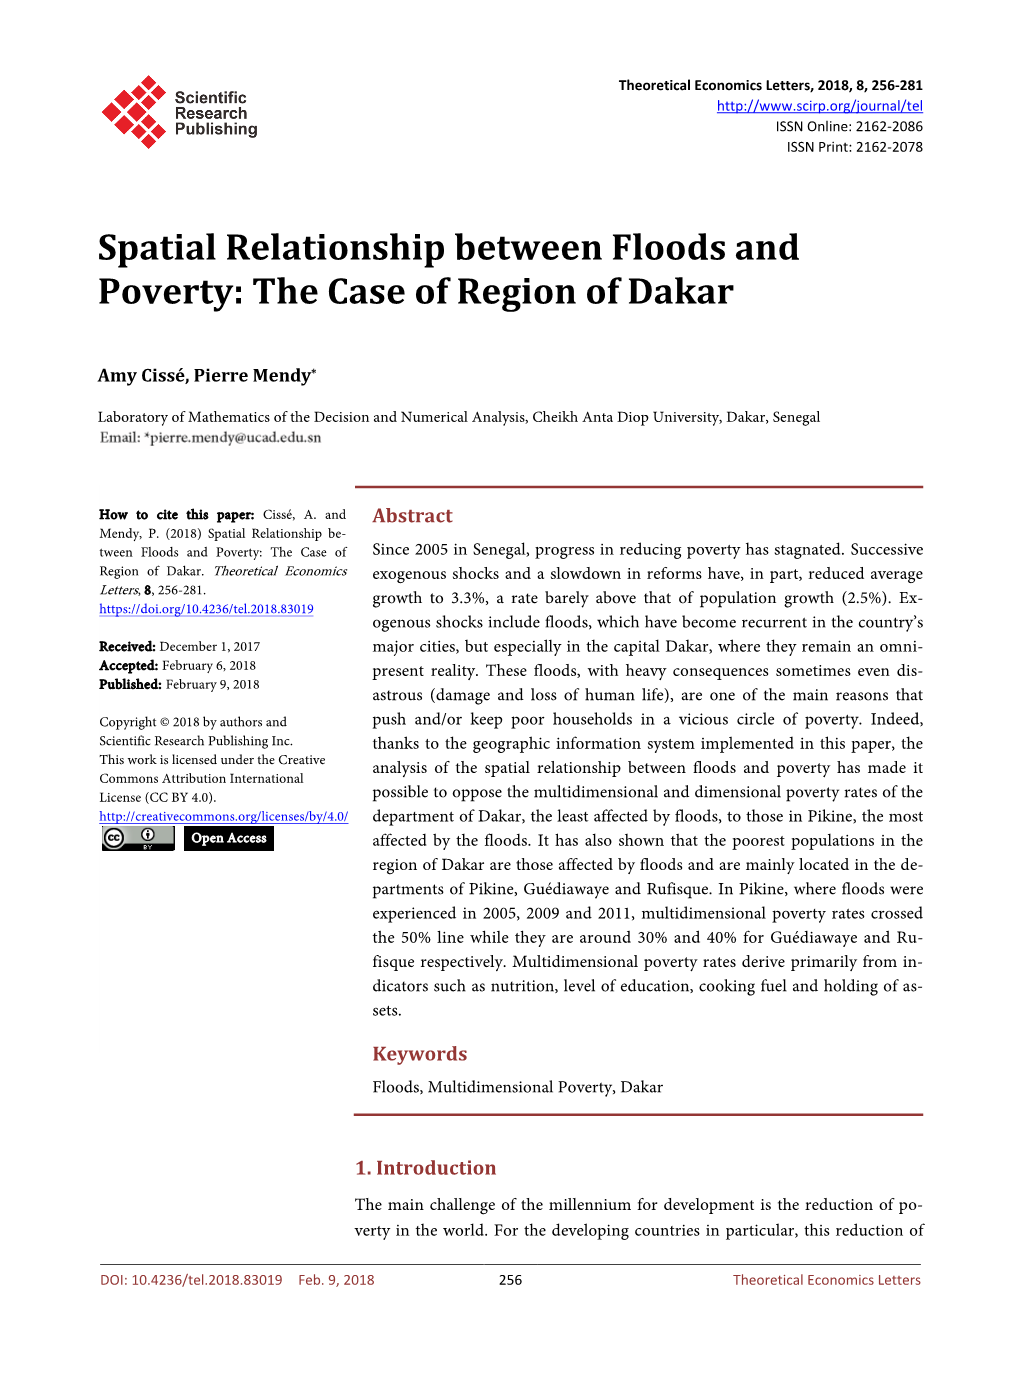 Spatial Relationship Between Floods and Poverty: the Case of Region of Dakar